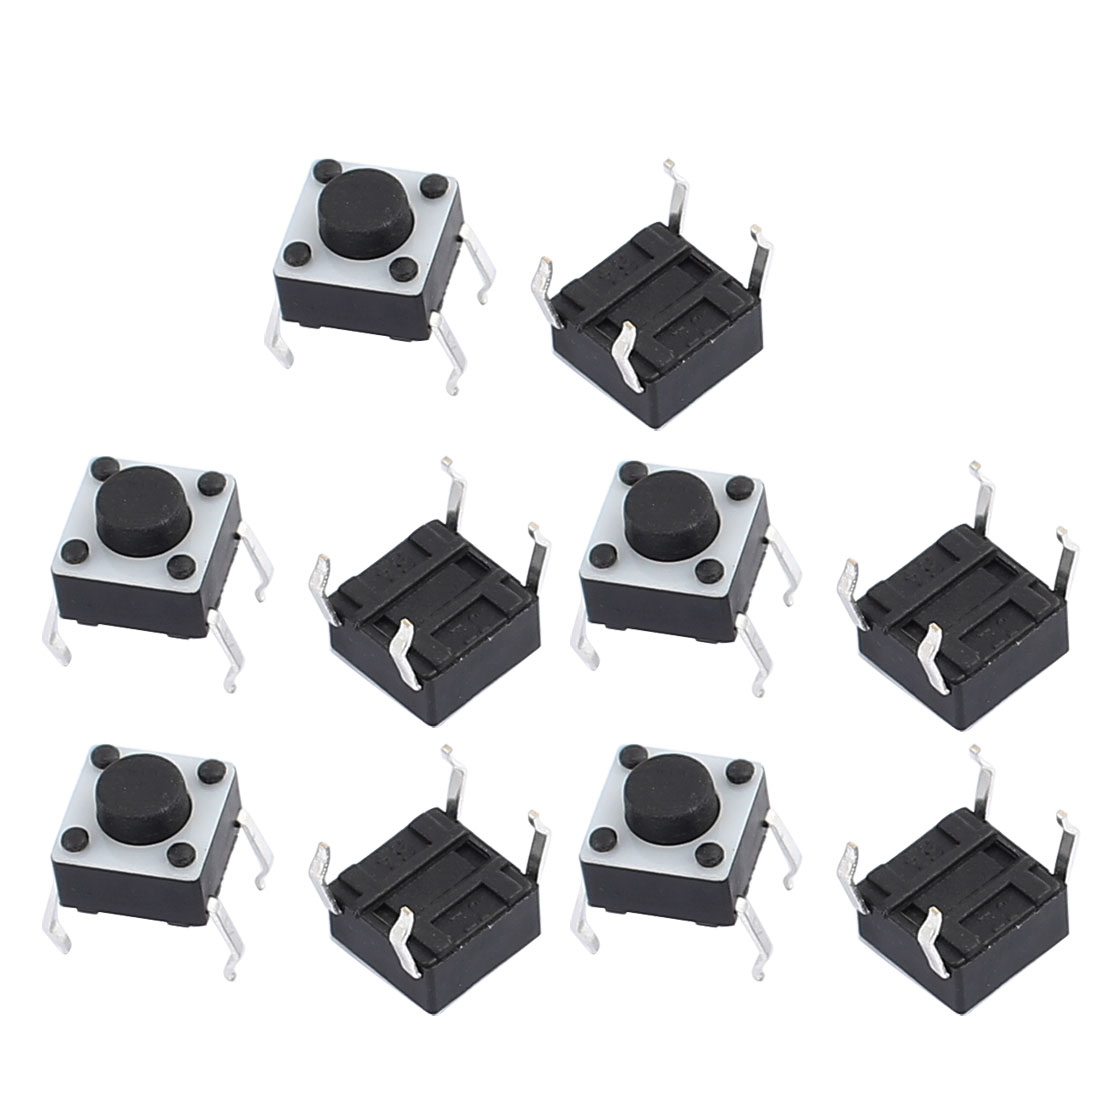 Unique Bargains 10Pcs 6mmx6mmx5mm Panel PCB Momentary Contact Tactile Tact Switch 4 Terminals